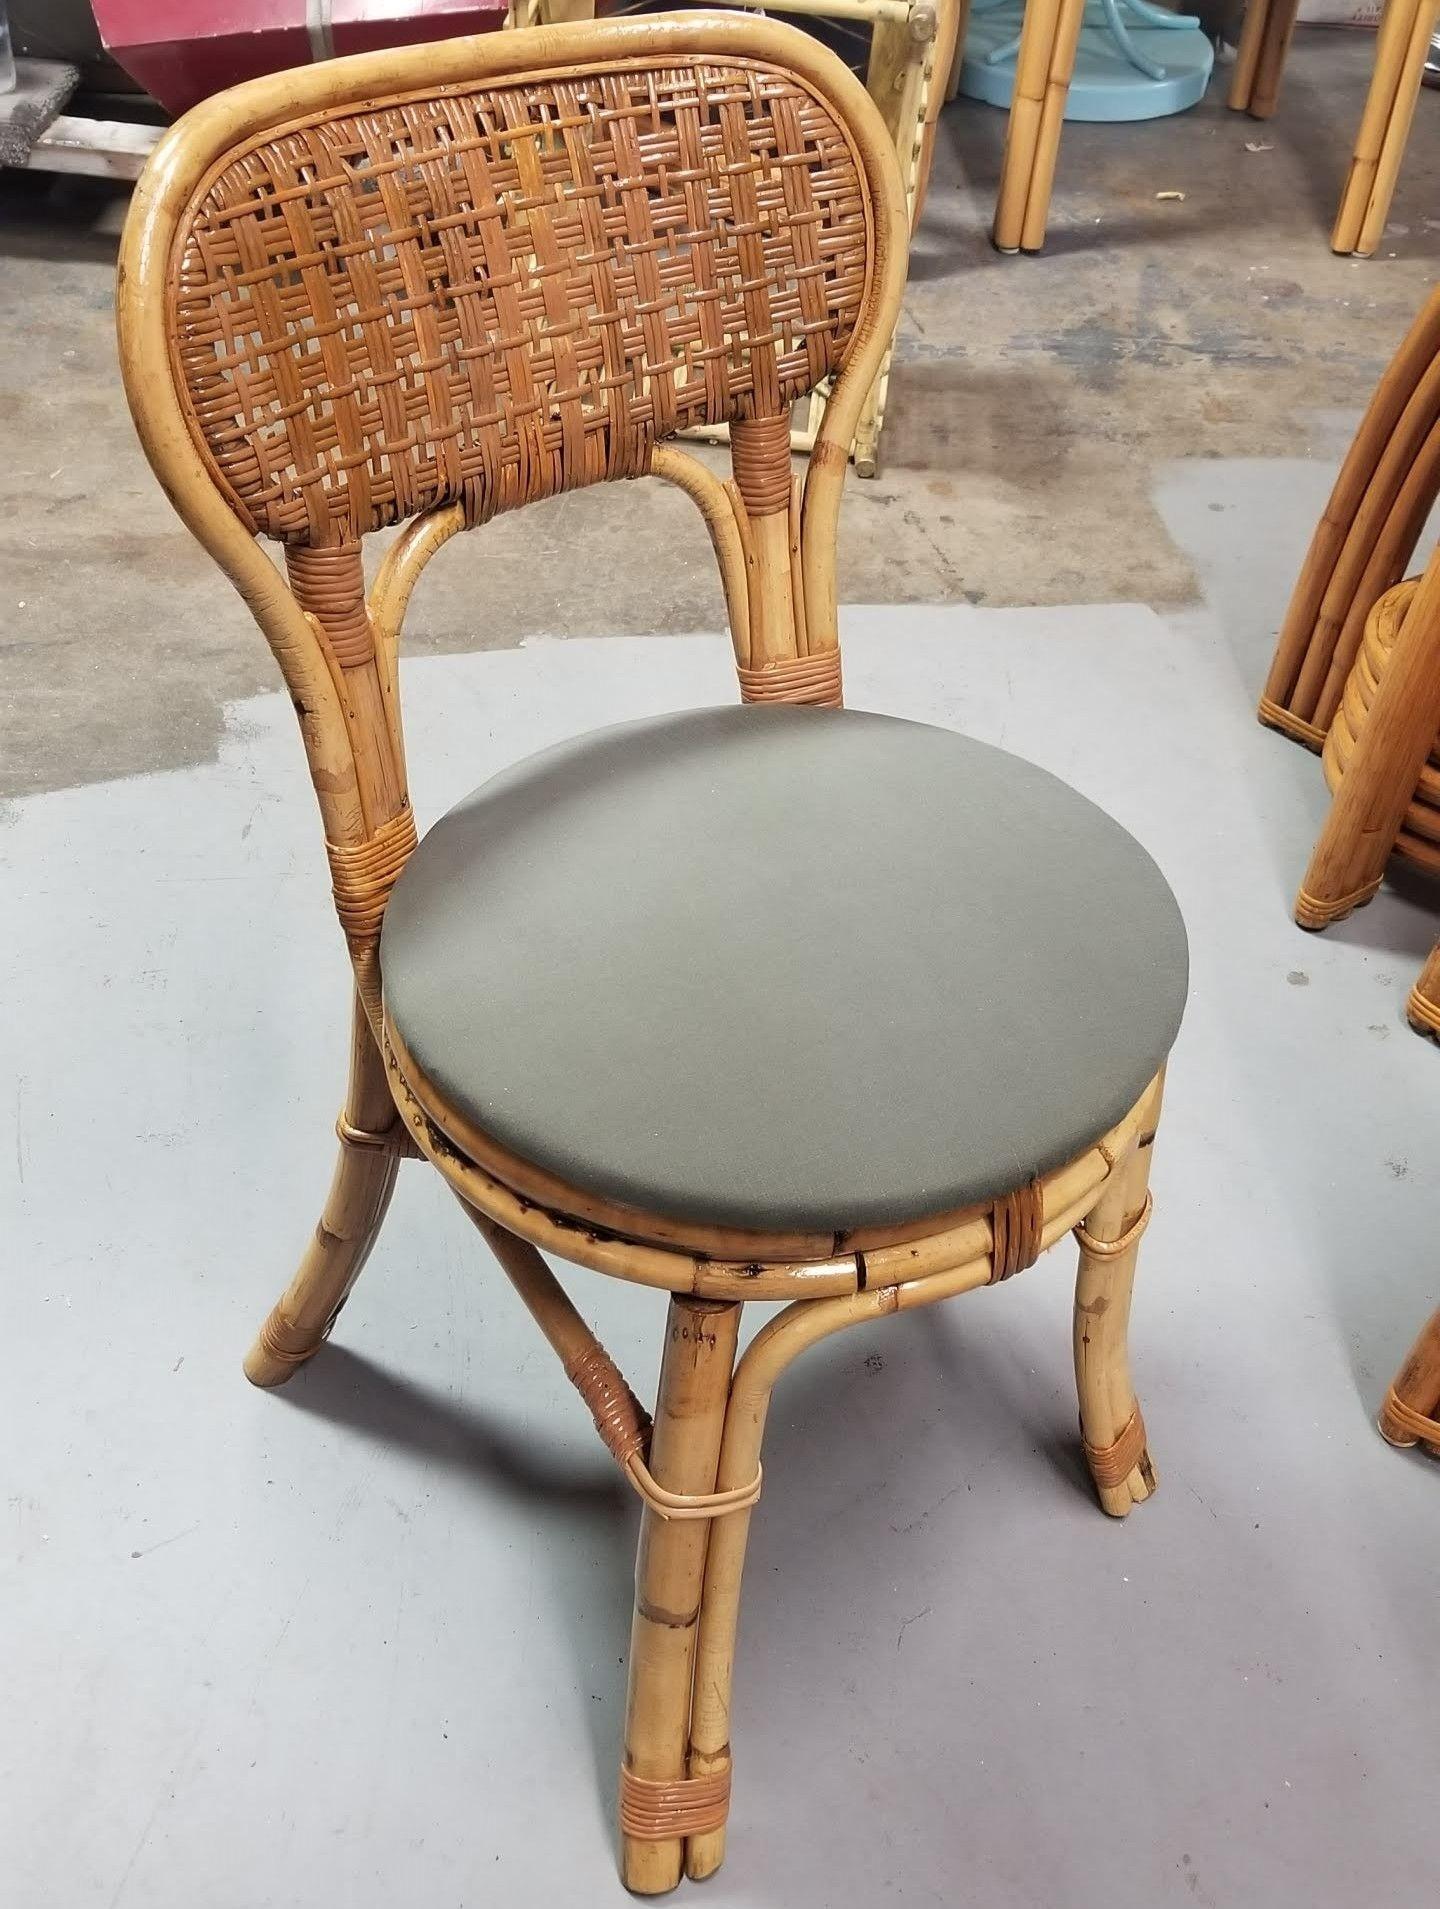 Restored Calif-Asia Style Rattan Wicker Fan Back Dining Side Chair, Pair In Excellent Condition For Sale In Van Nuys, CA